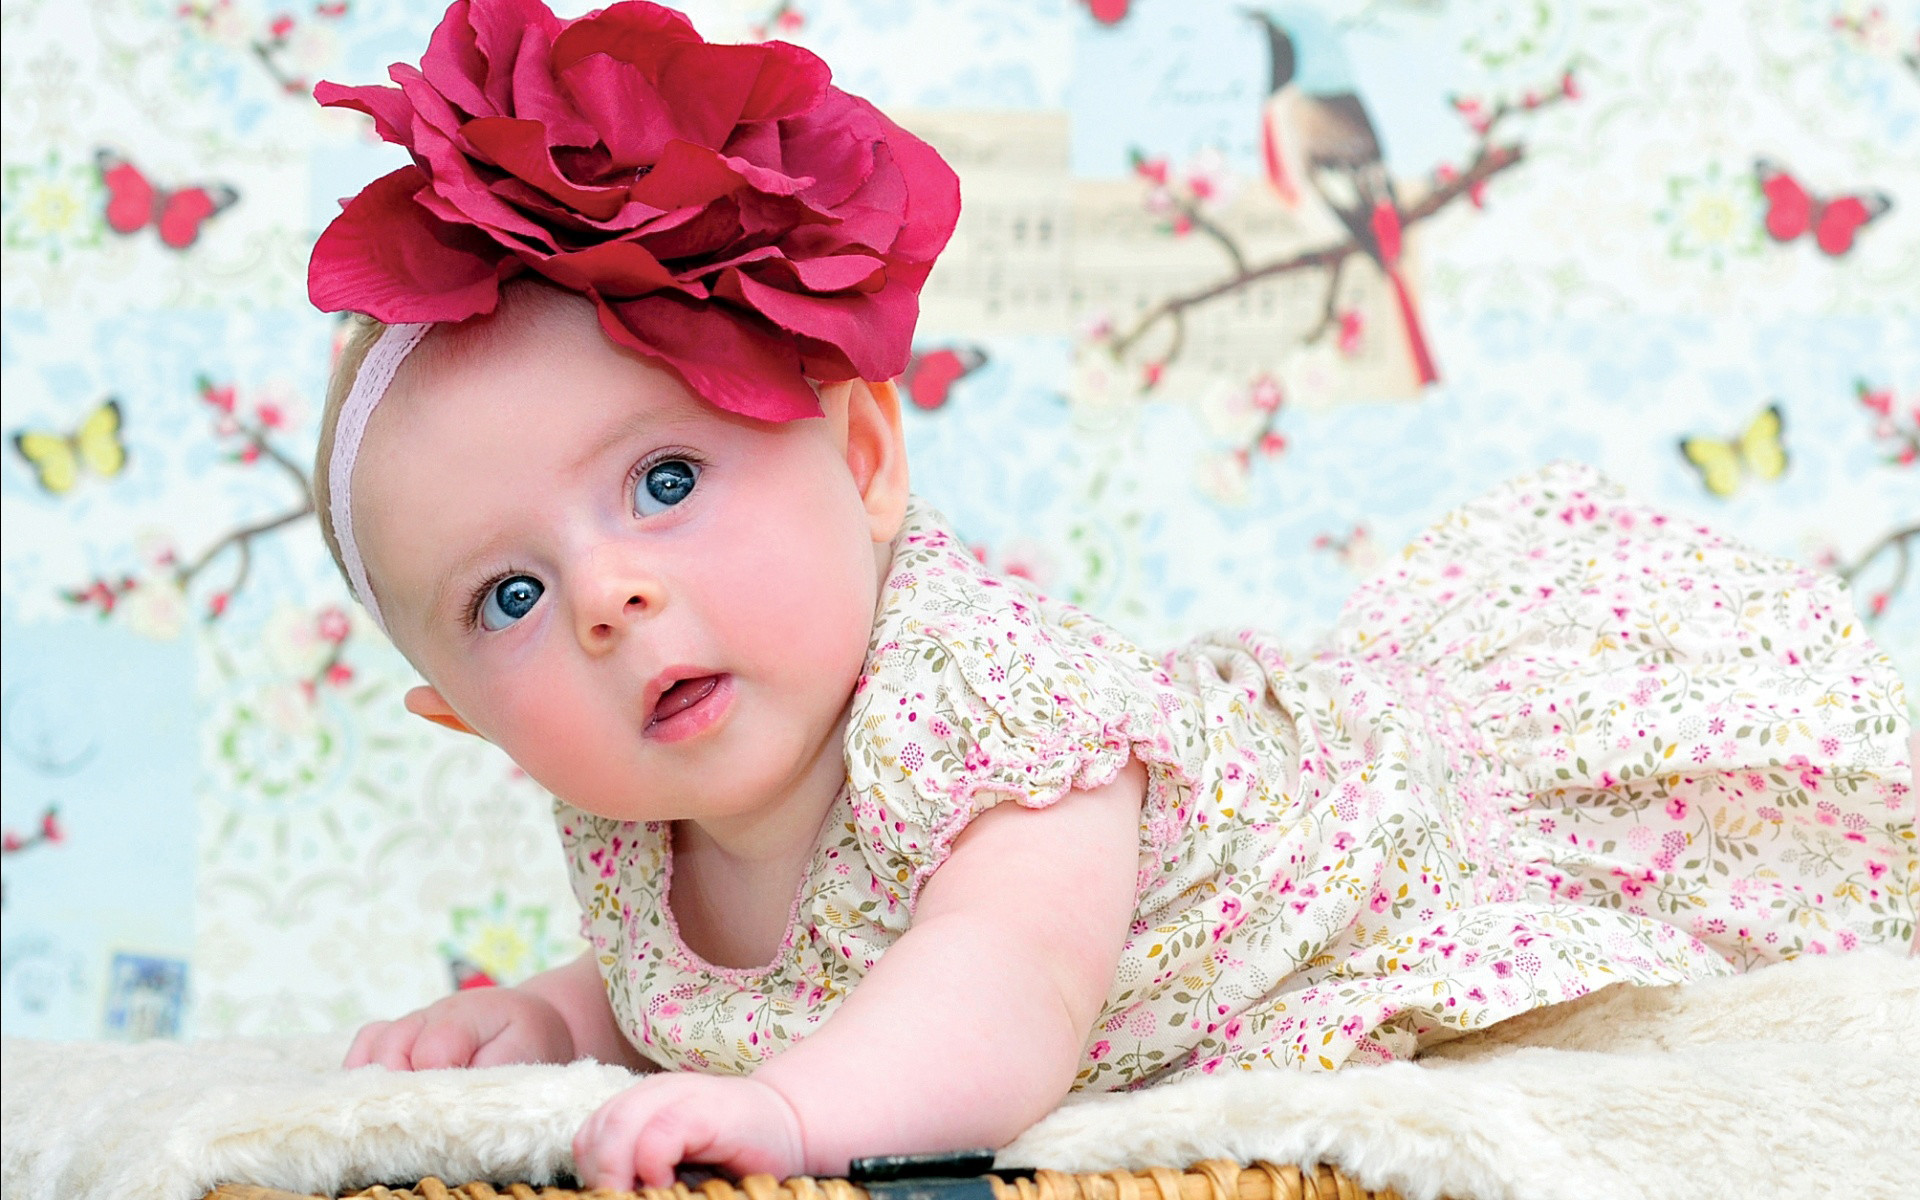 1920x1200 Cute Baby Girl Wallpaper Cool Pictures #6om8053a – Yoanu